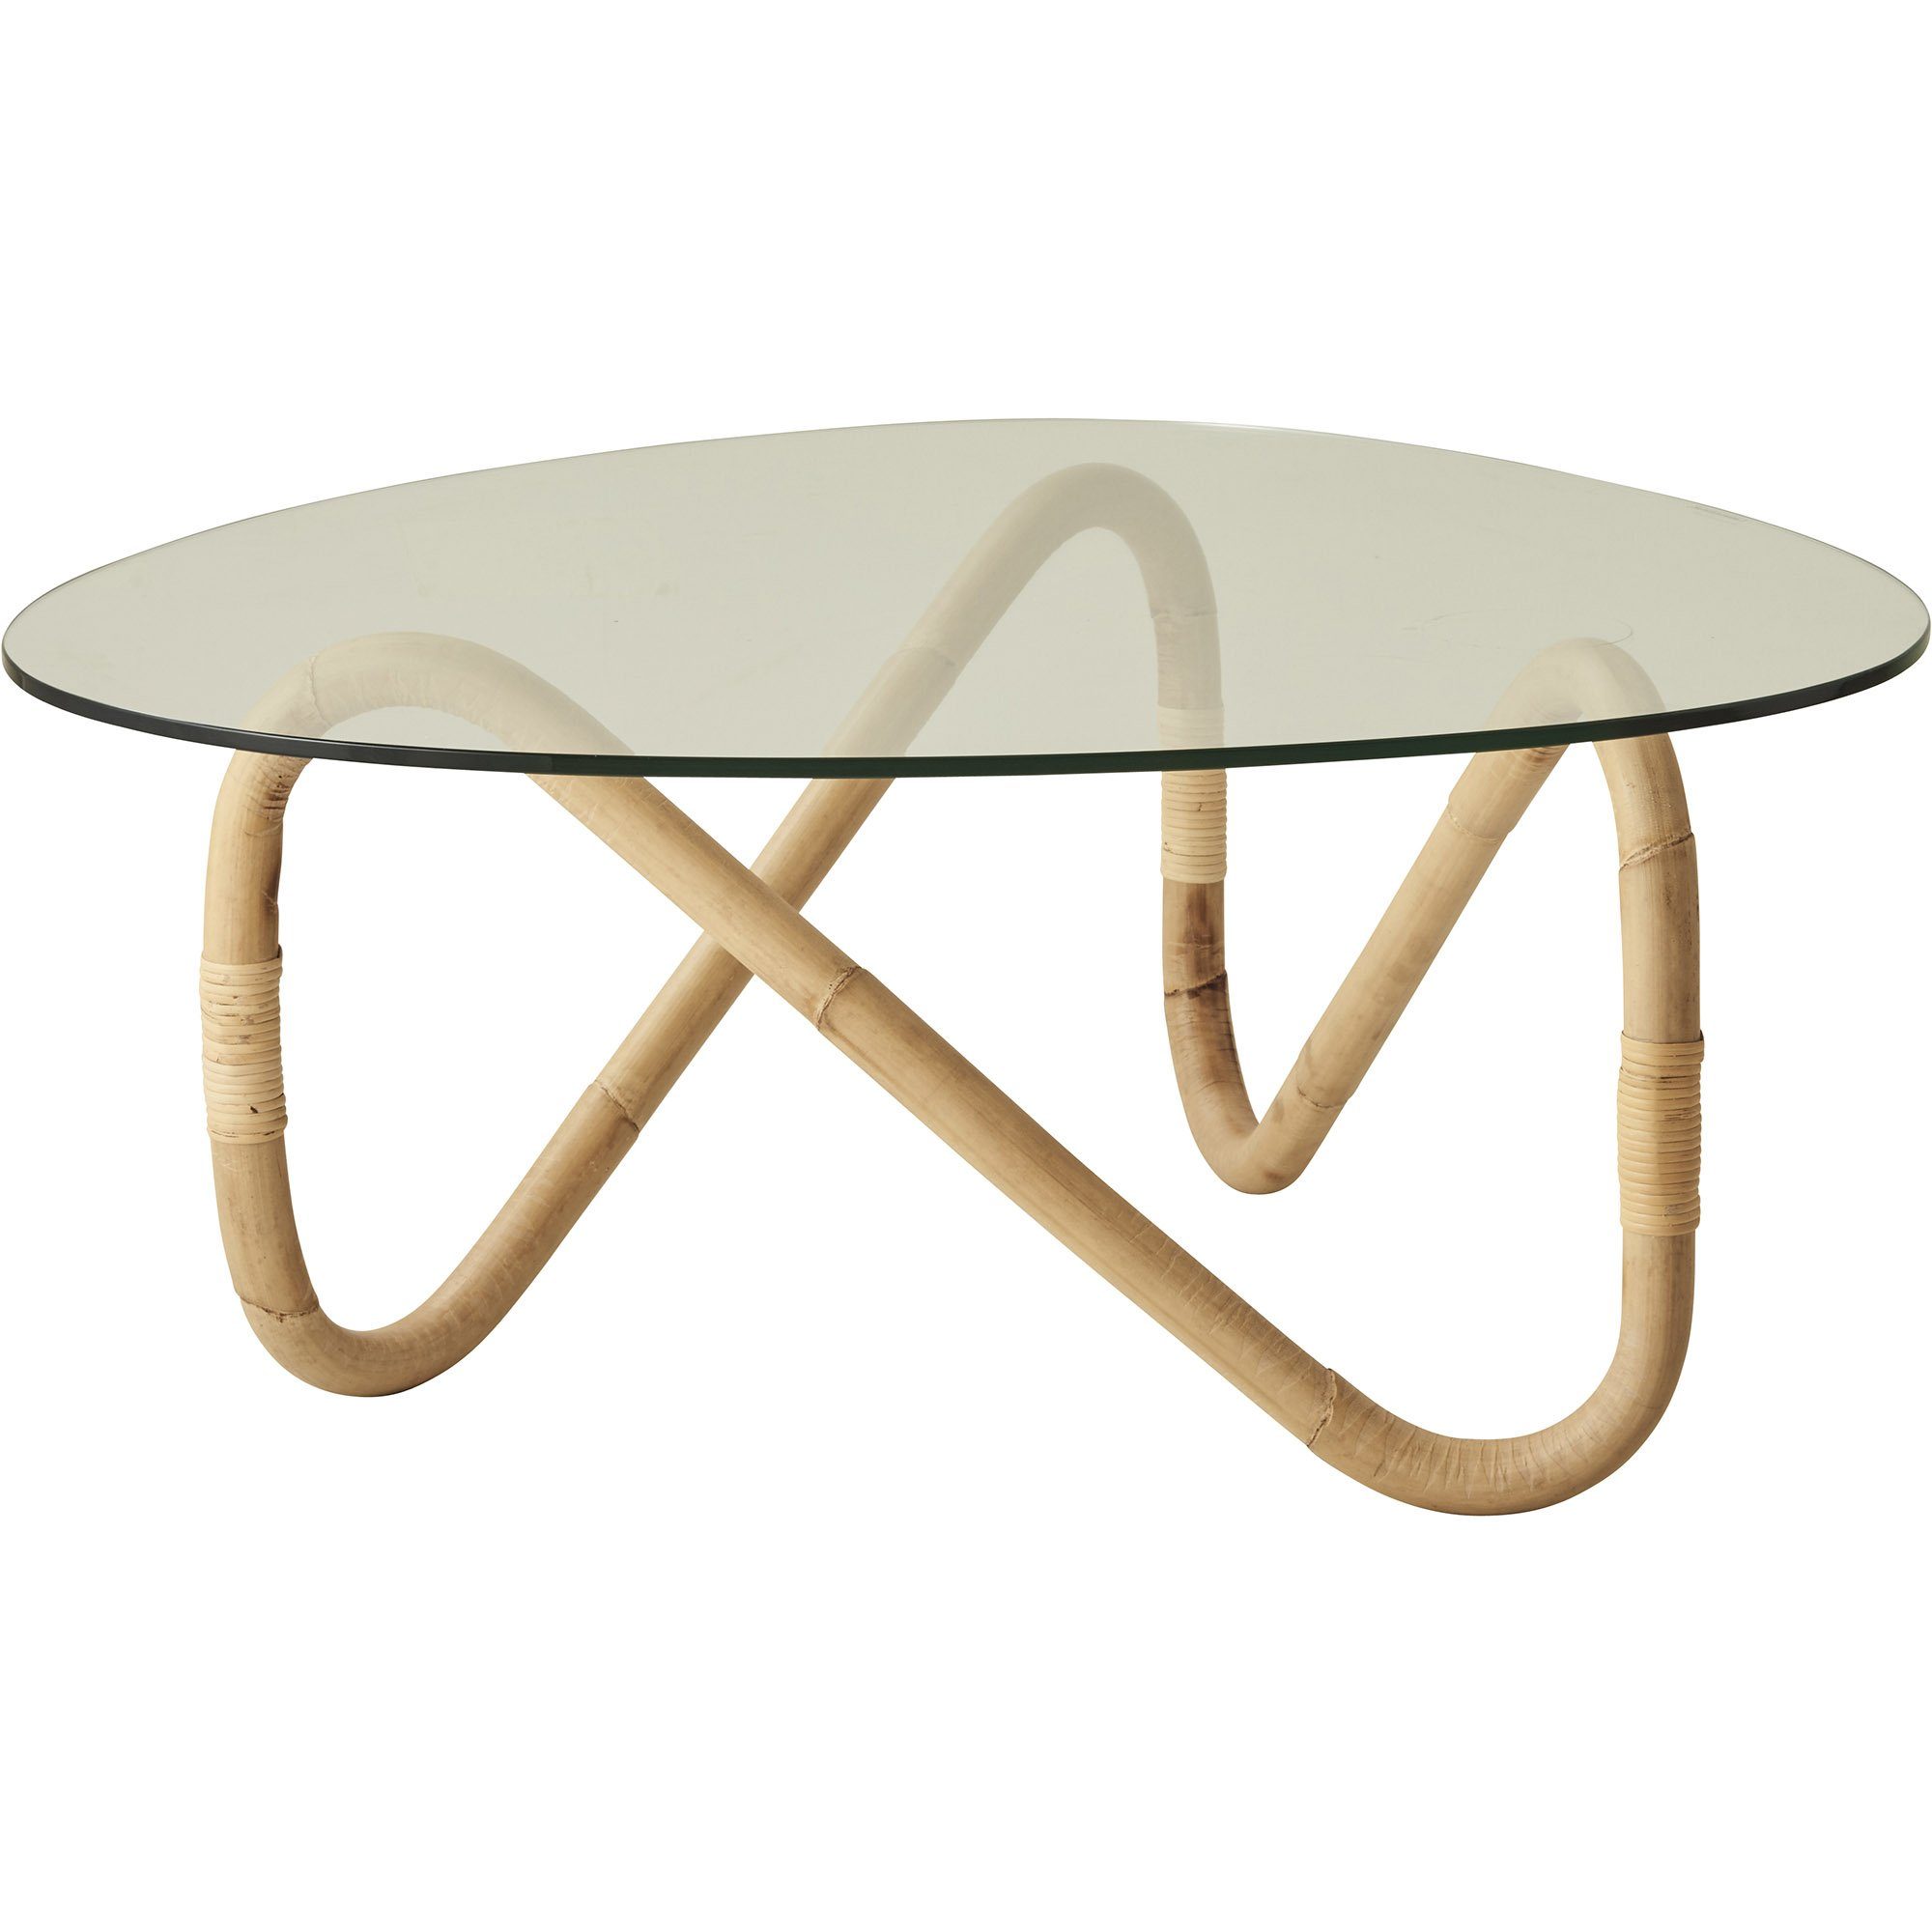 20 Cool (and Affordable) Coffee Tables That Only Look Expensive